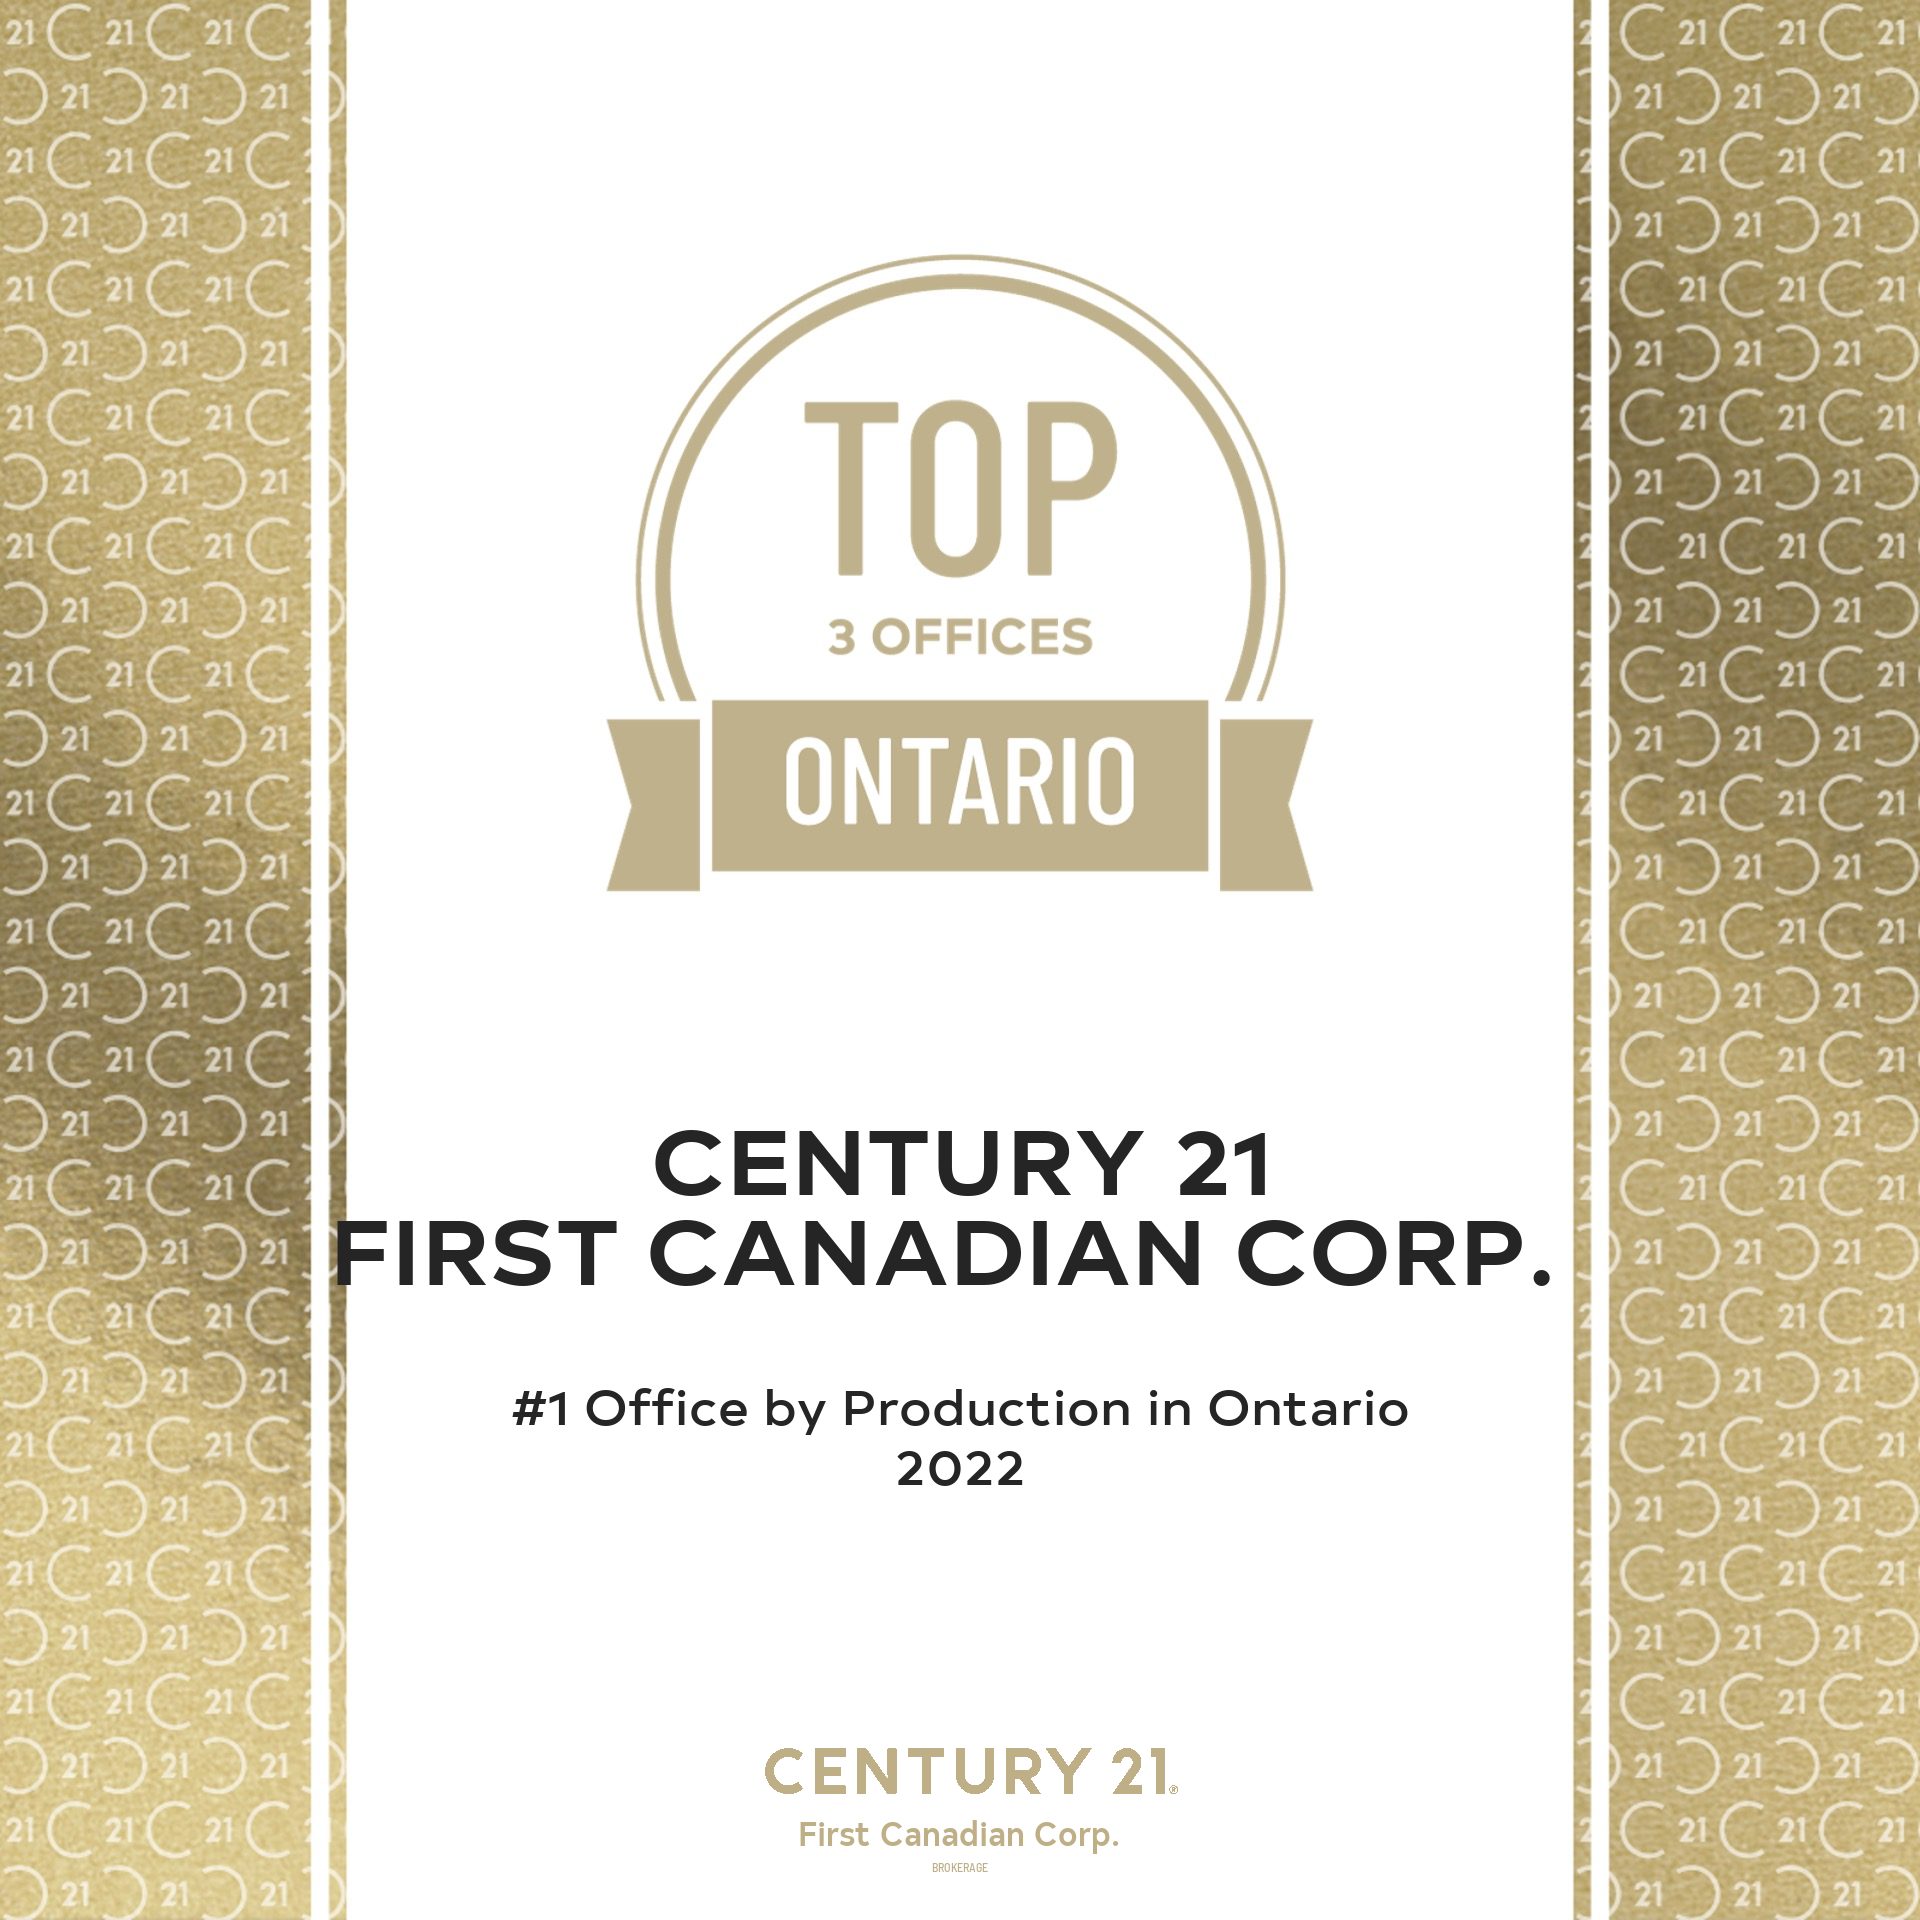 Century 21 #1 Office by Production in Ontario 2022